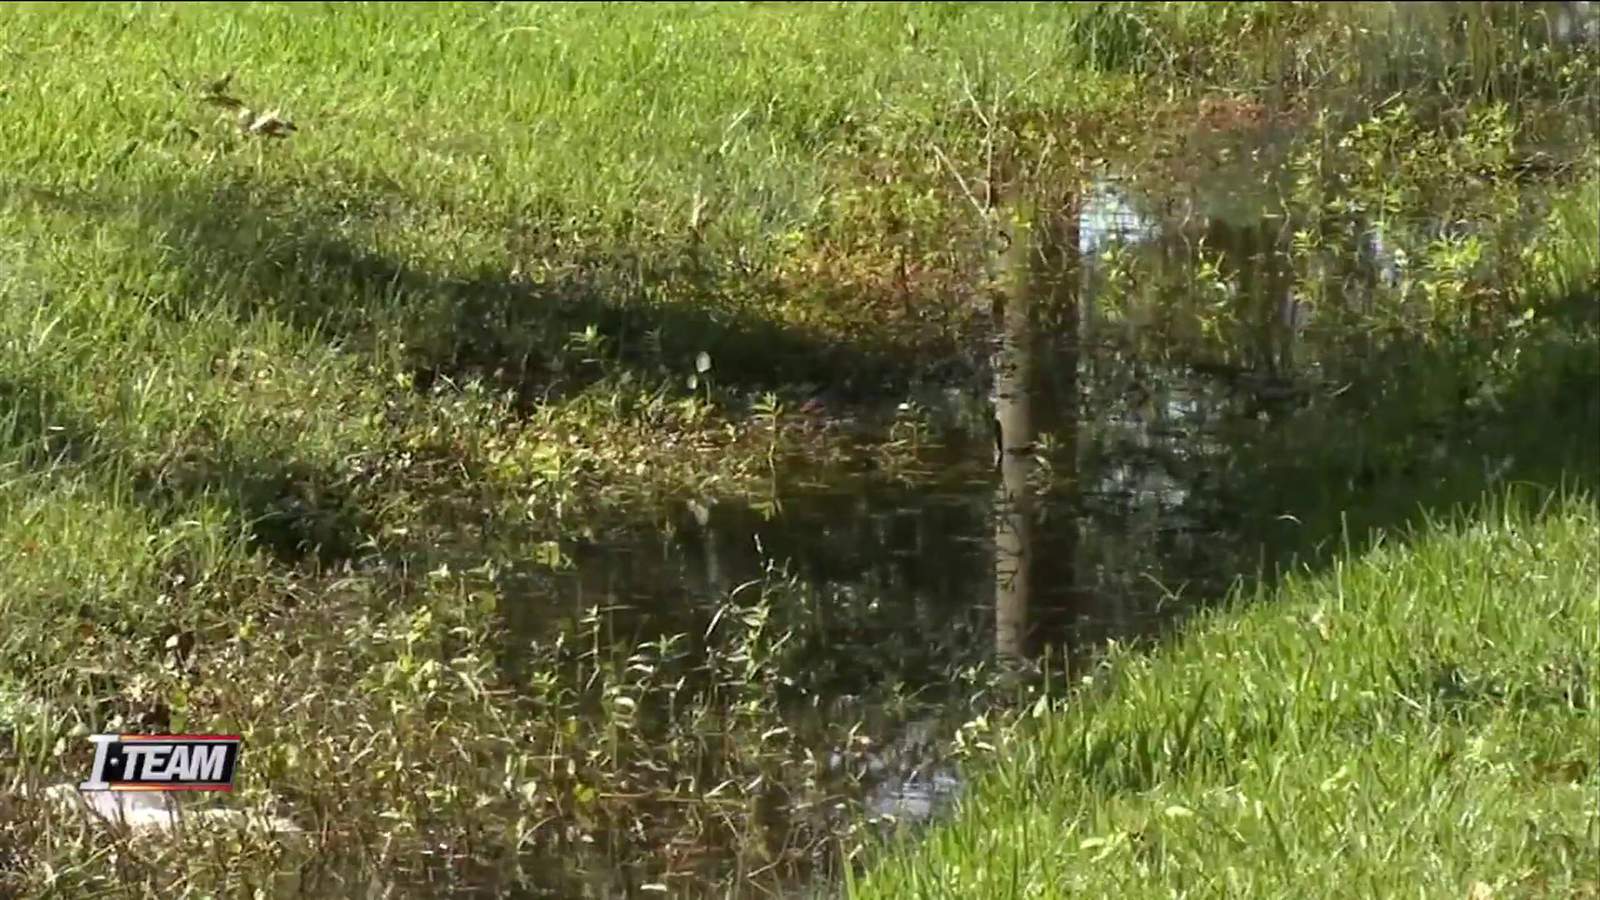 Jacksonville requests $6M in state funds to phase out failing septic tanks